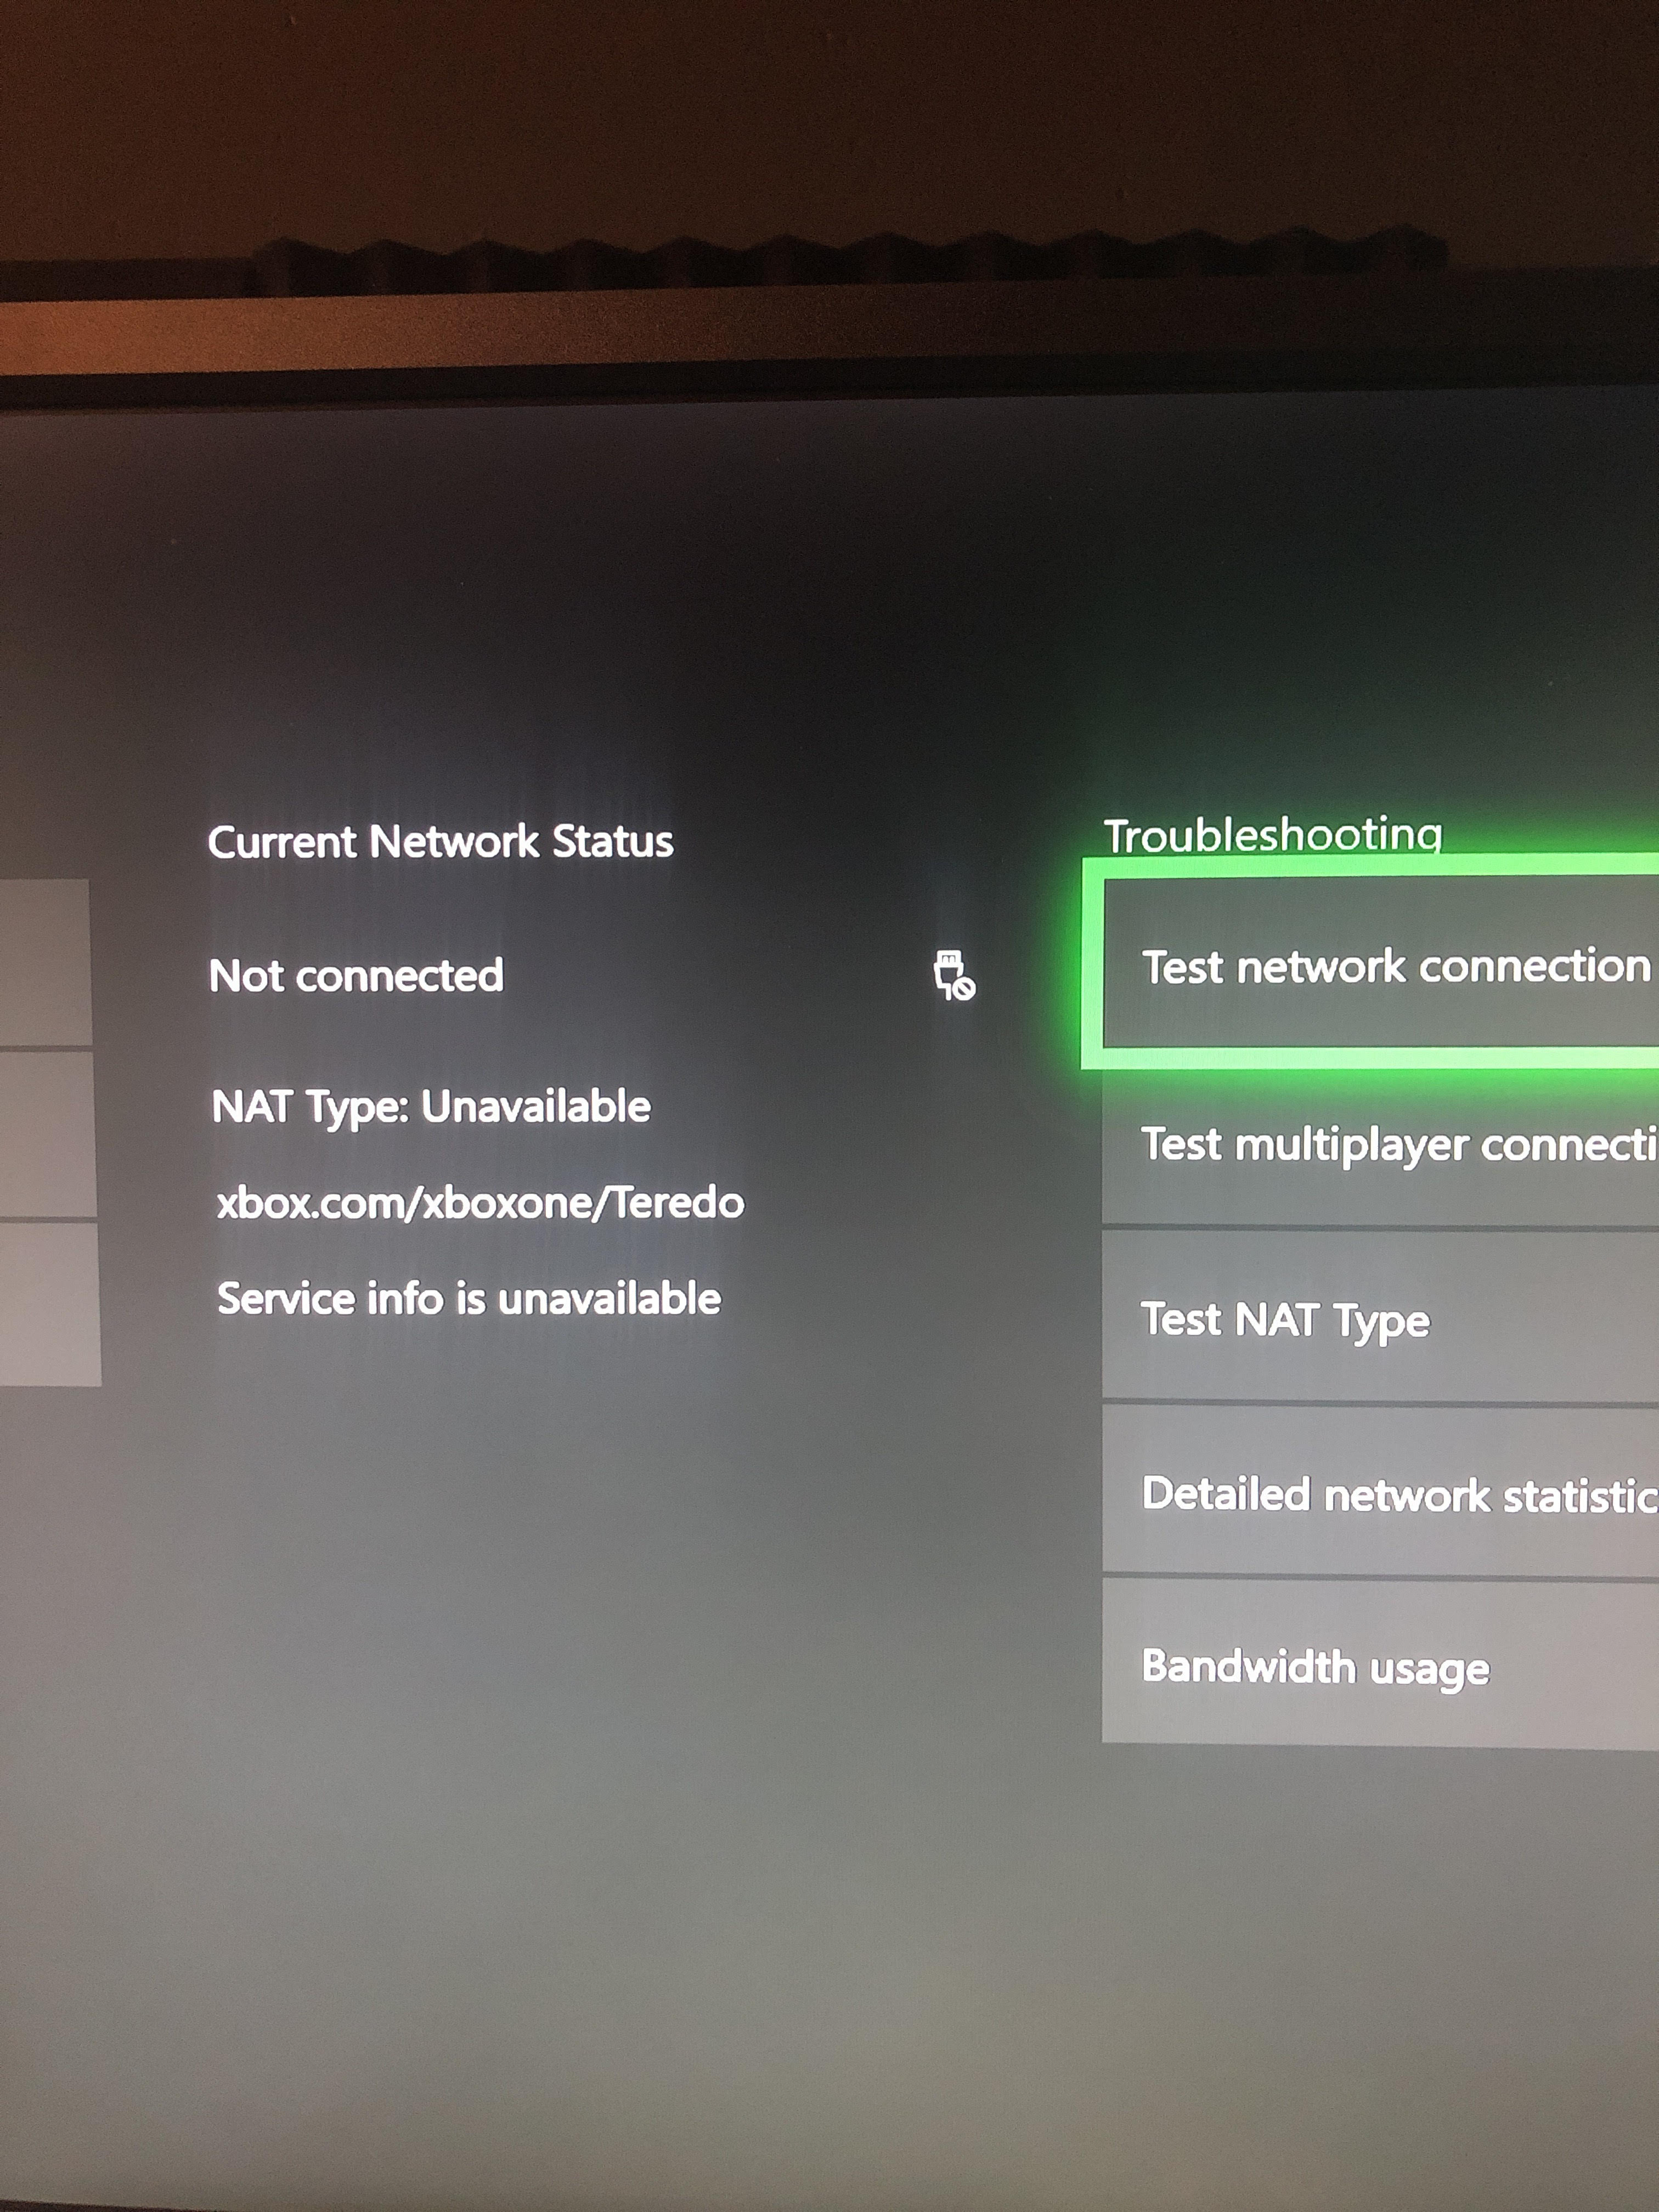 Xbox one X will connect via wif but not with an Et... - NETGEAR Communities